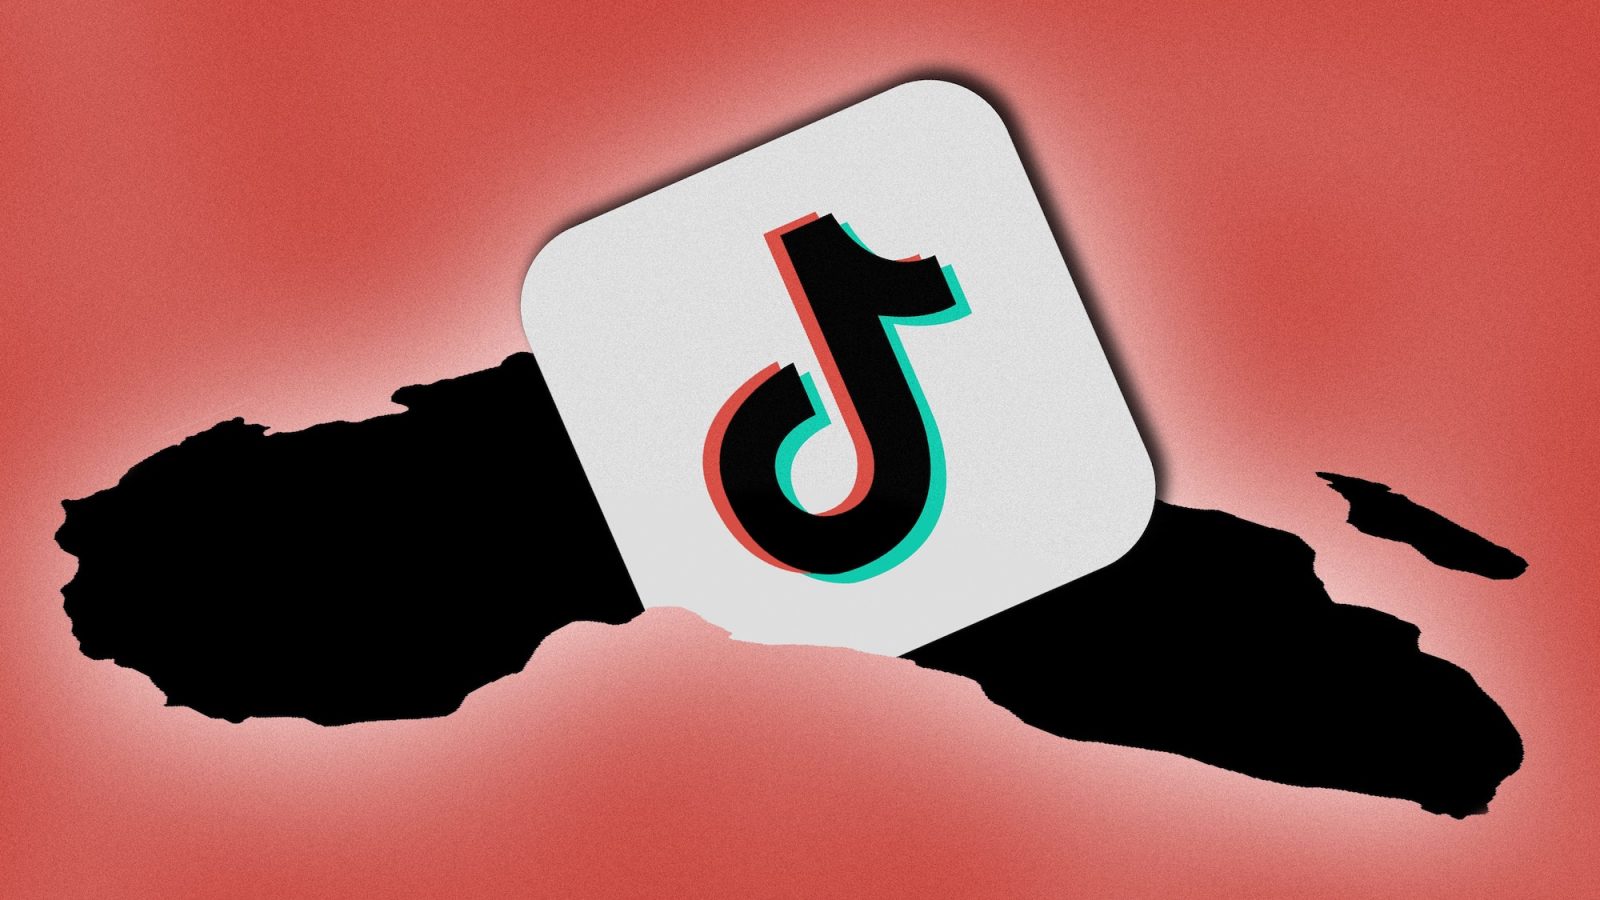 Do world leaders and governments use TikTok?